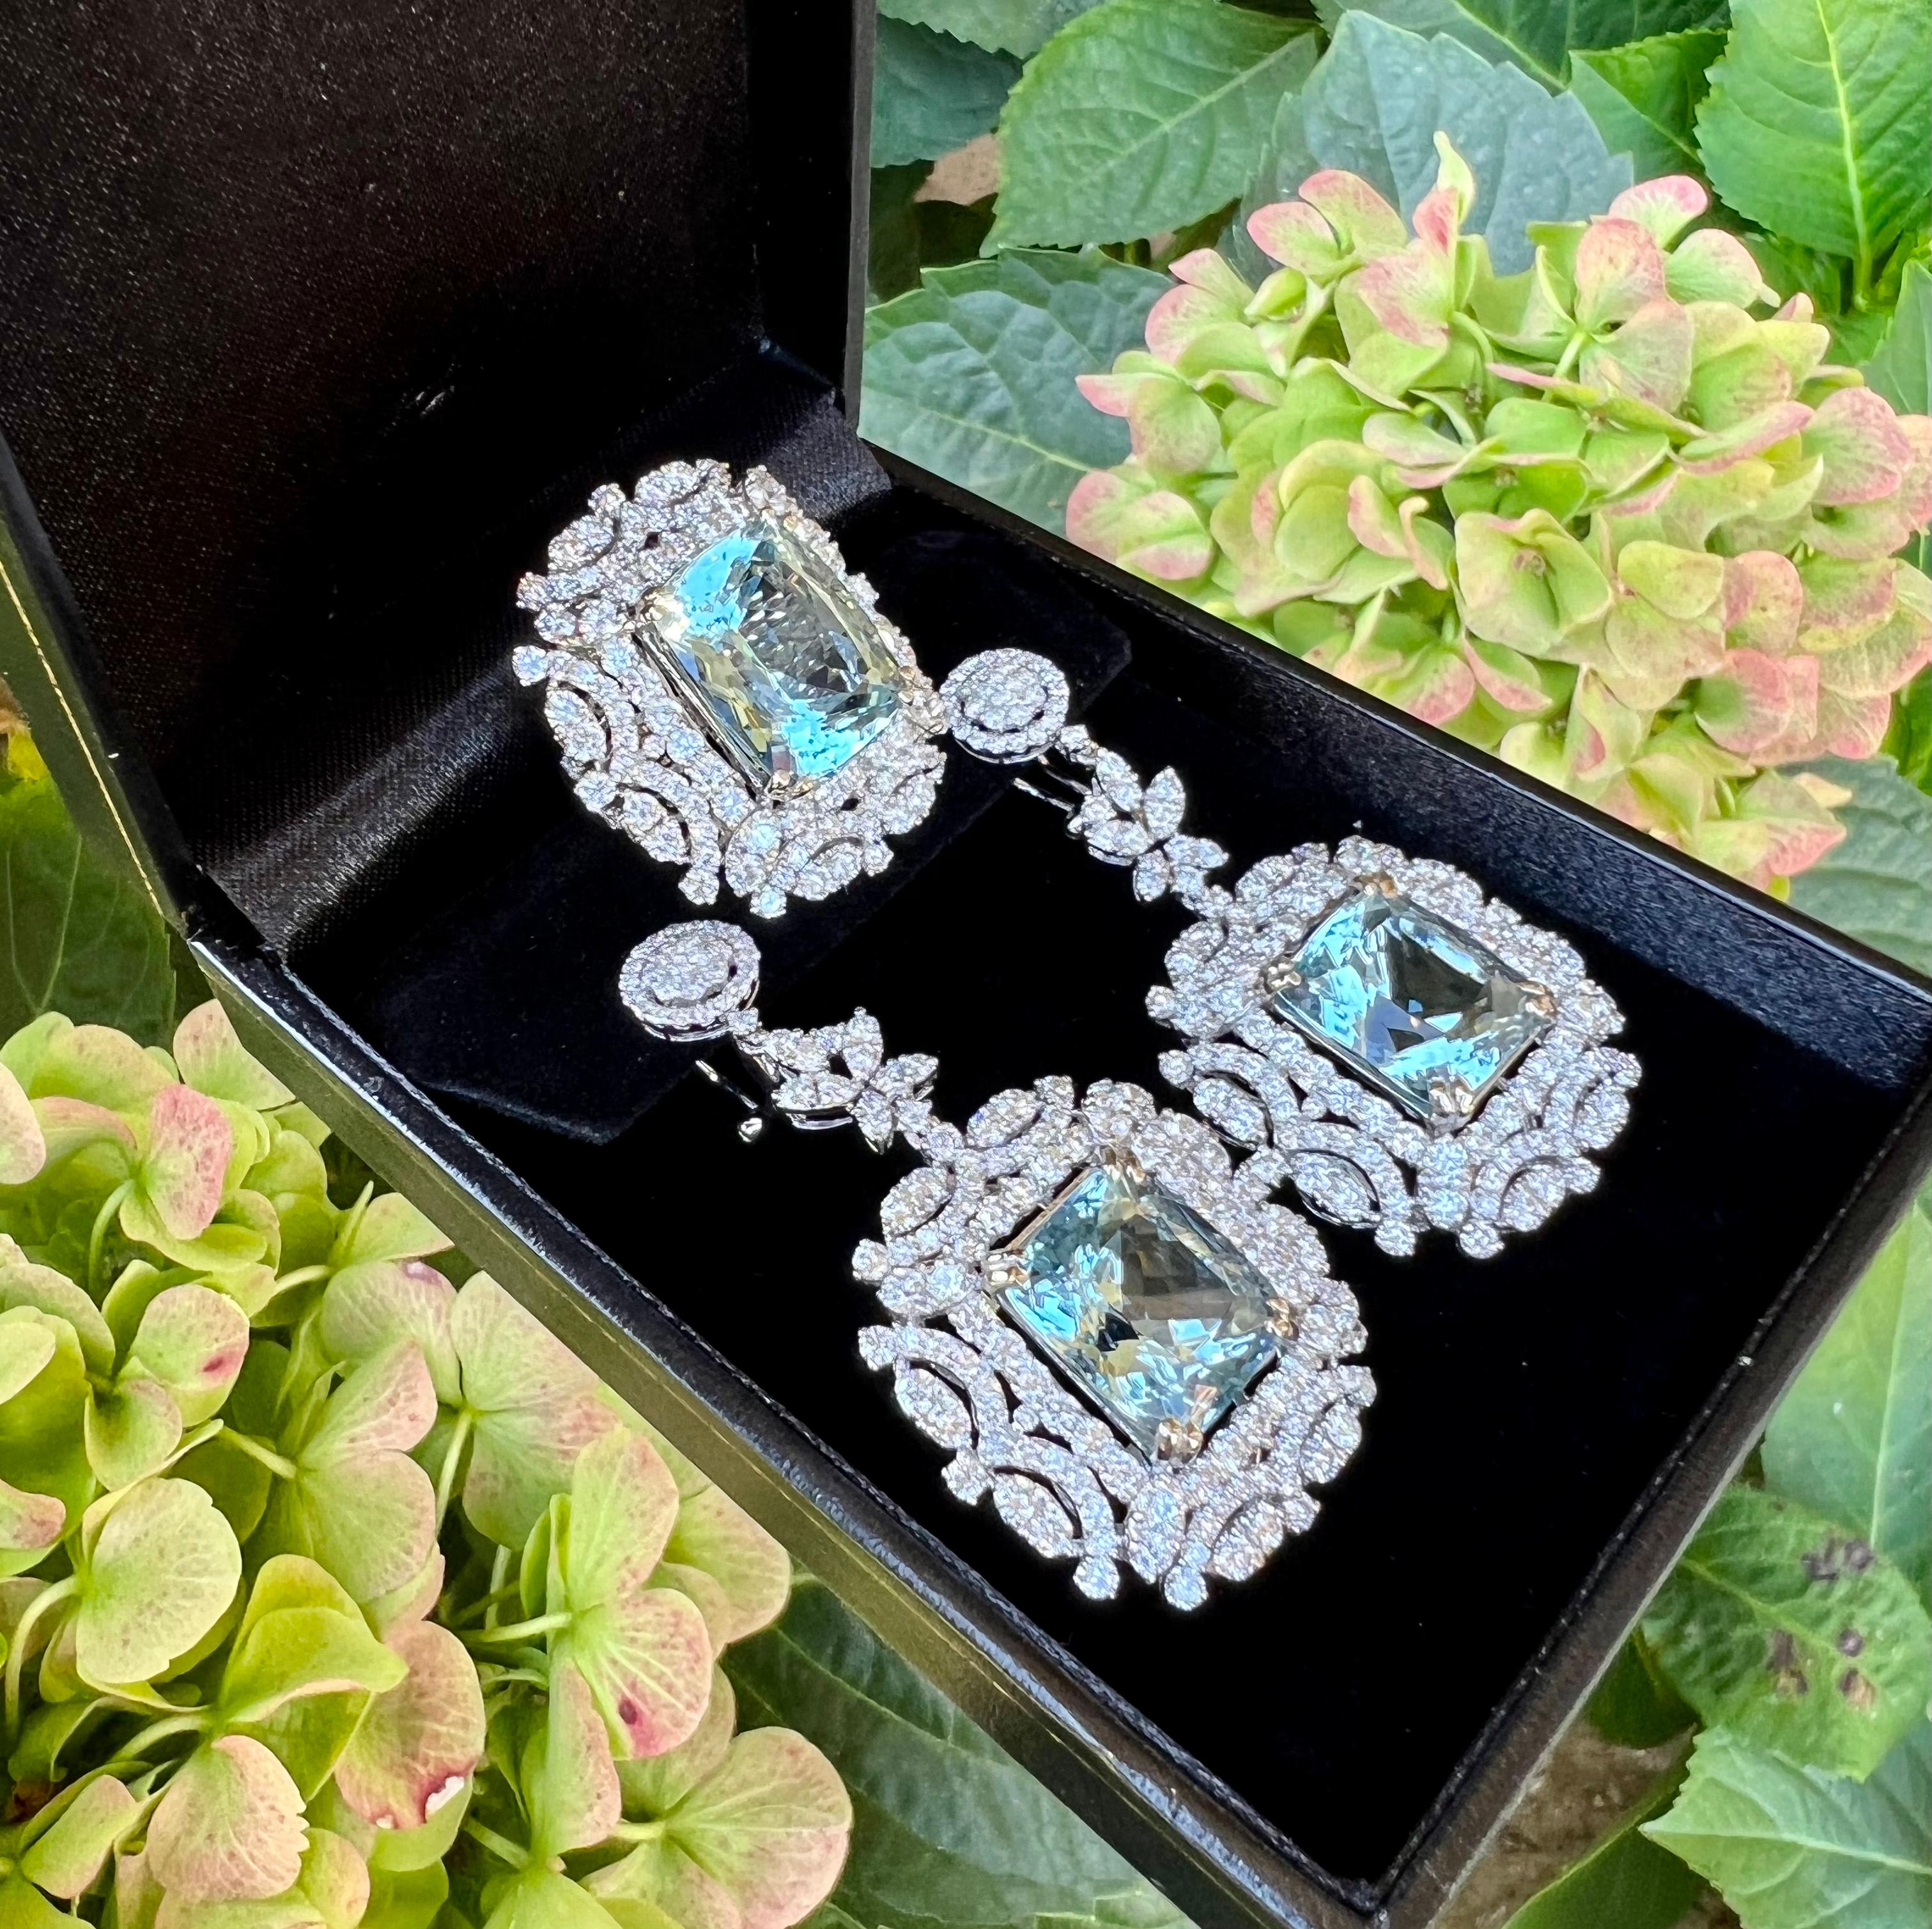 A sensational and very opulent pair of drop dead gorgeous earrings feature emerald cushion cut natural aquamarines that are talon prong set in 18 karat white gold.  Each aquamarine is surrounded by a mesmerizing halo of round brilliant diamonds with